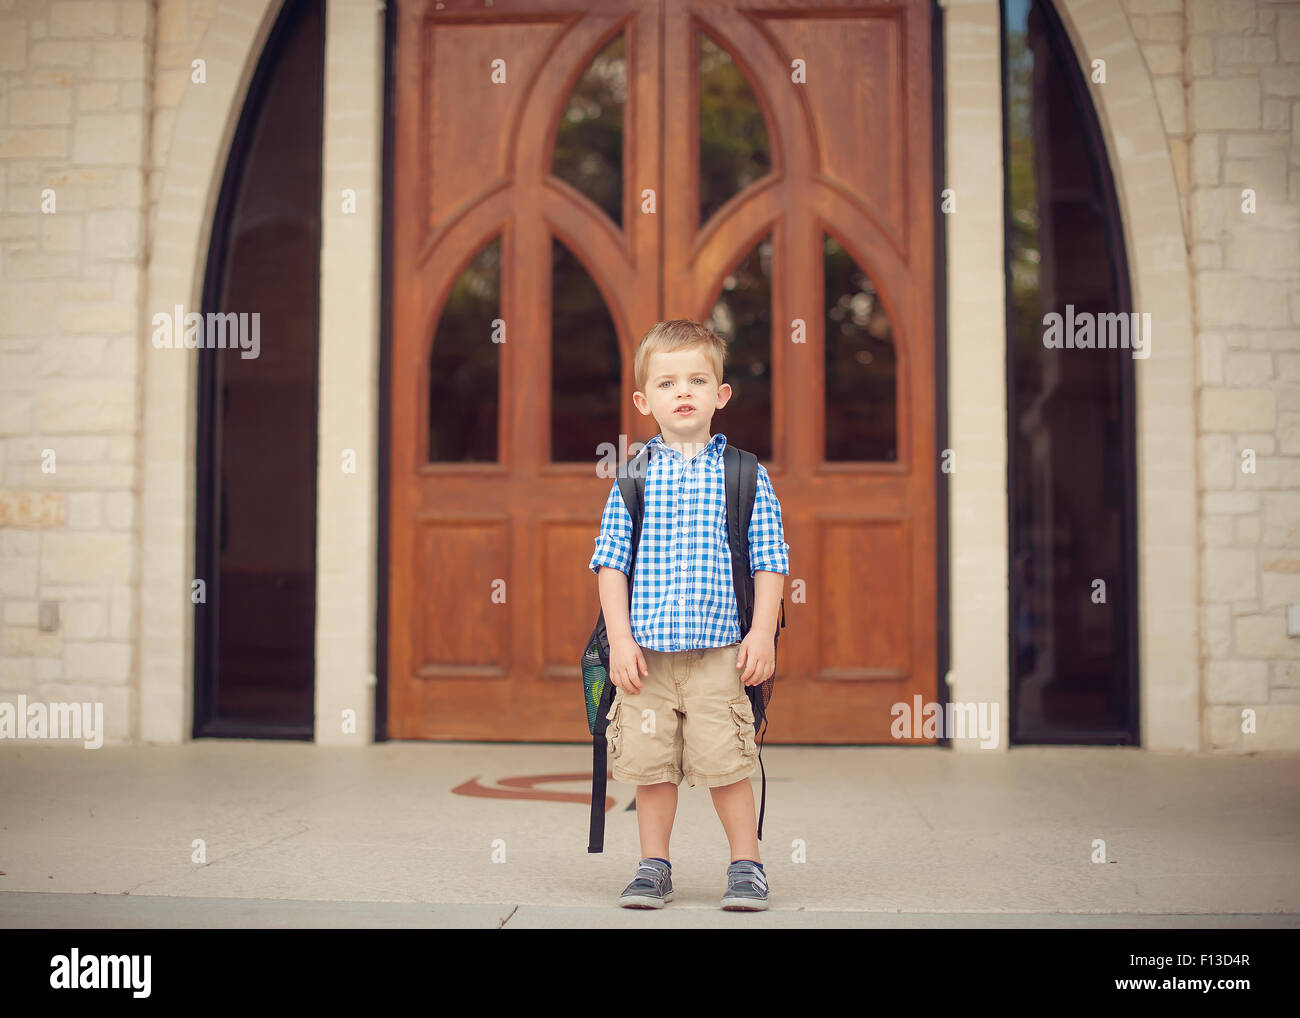 Portrait of a little boy on his first day of school Stock Photo